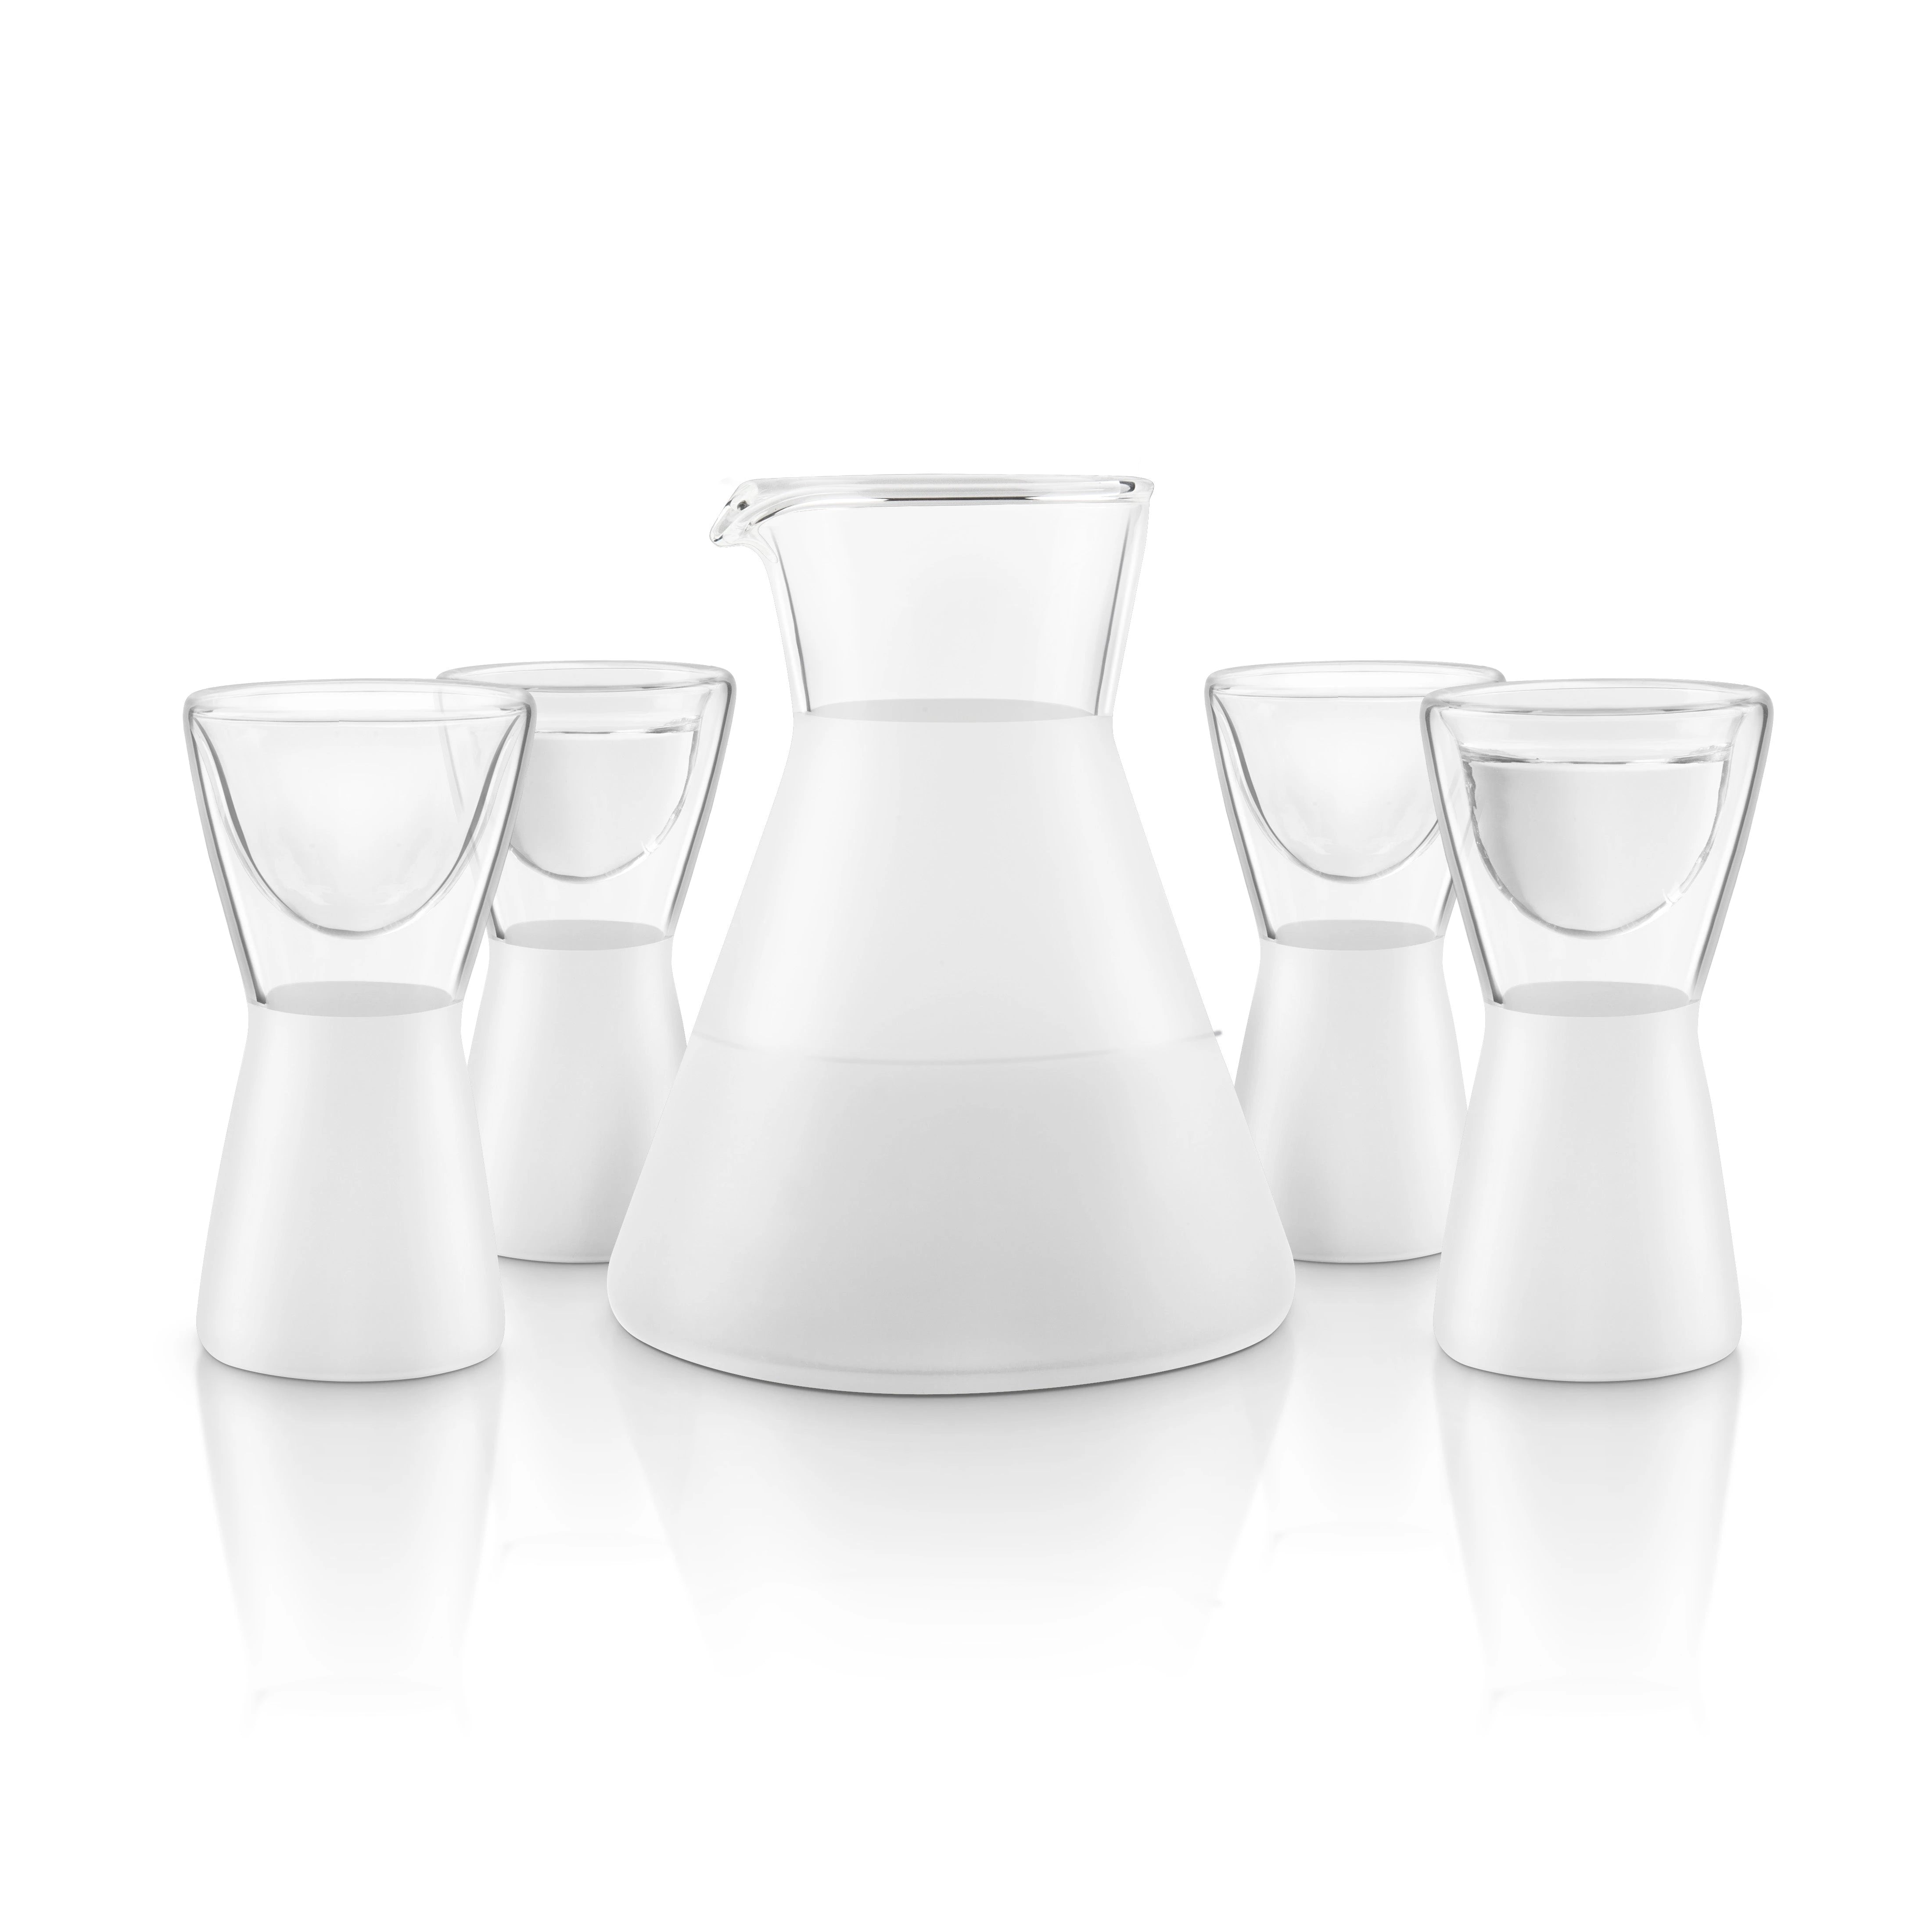 FINAL TOUCH DECANTER SAKE SERVING 5PC SK5401